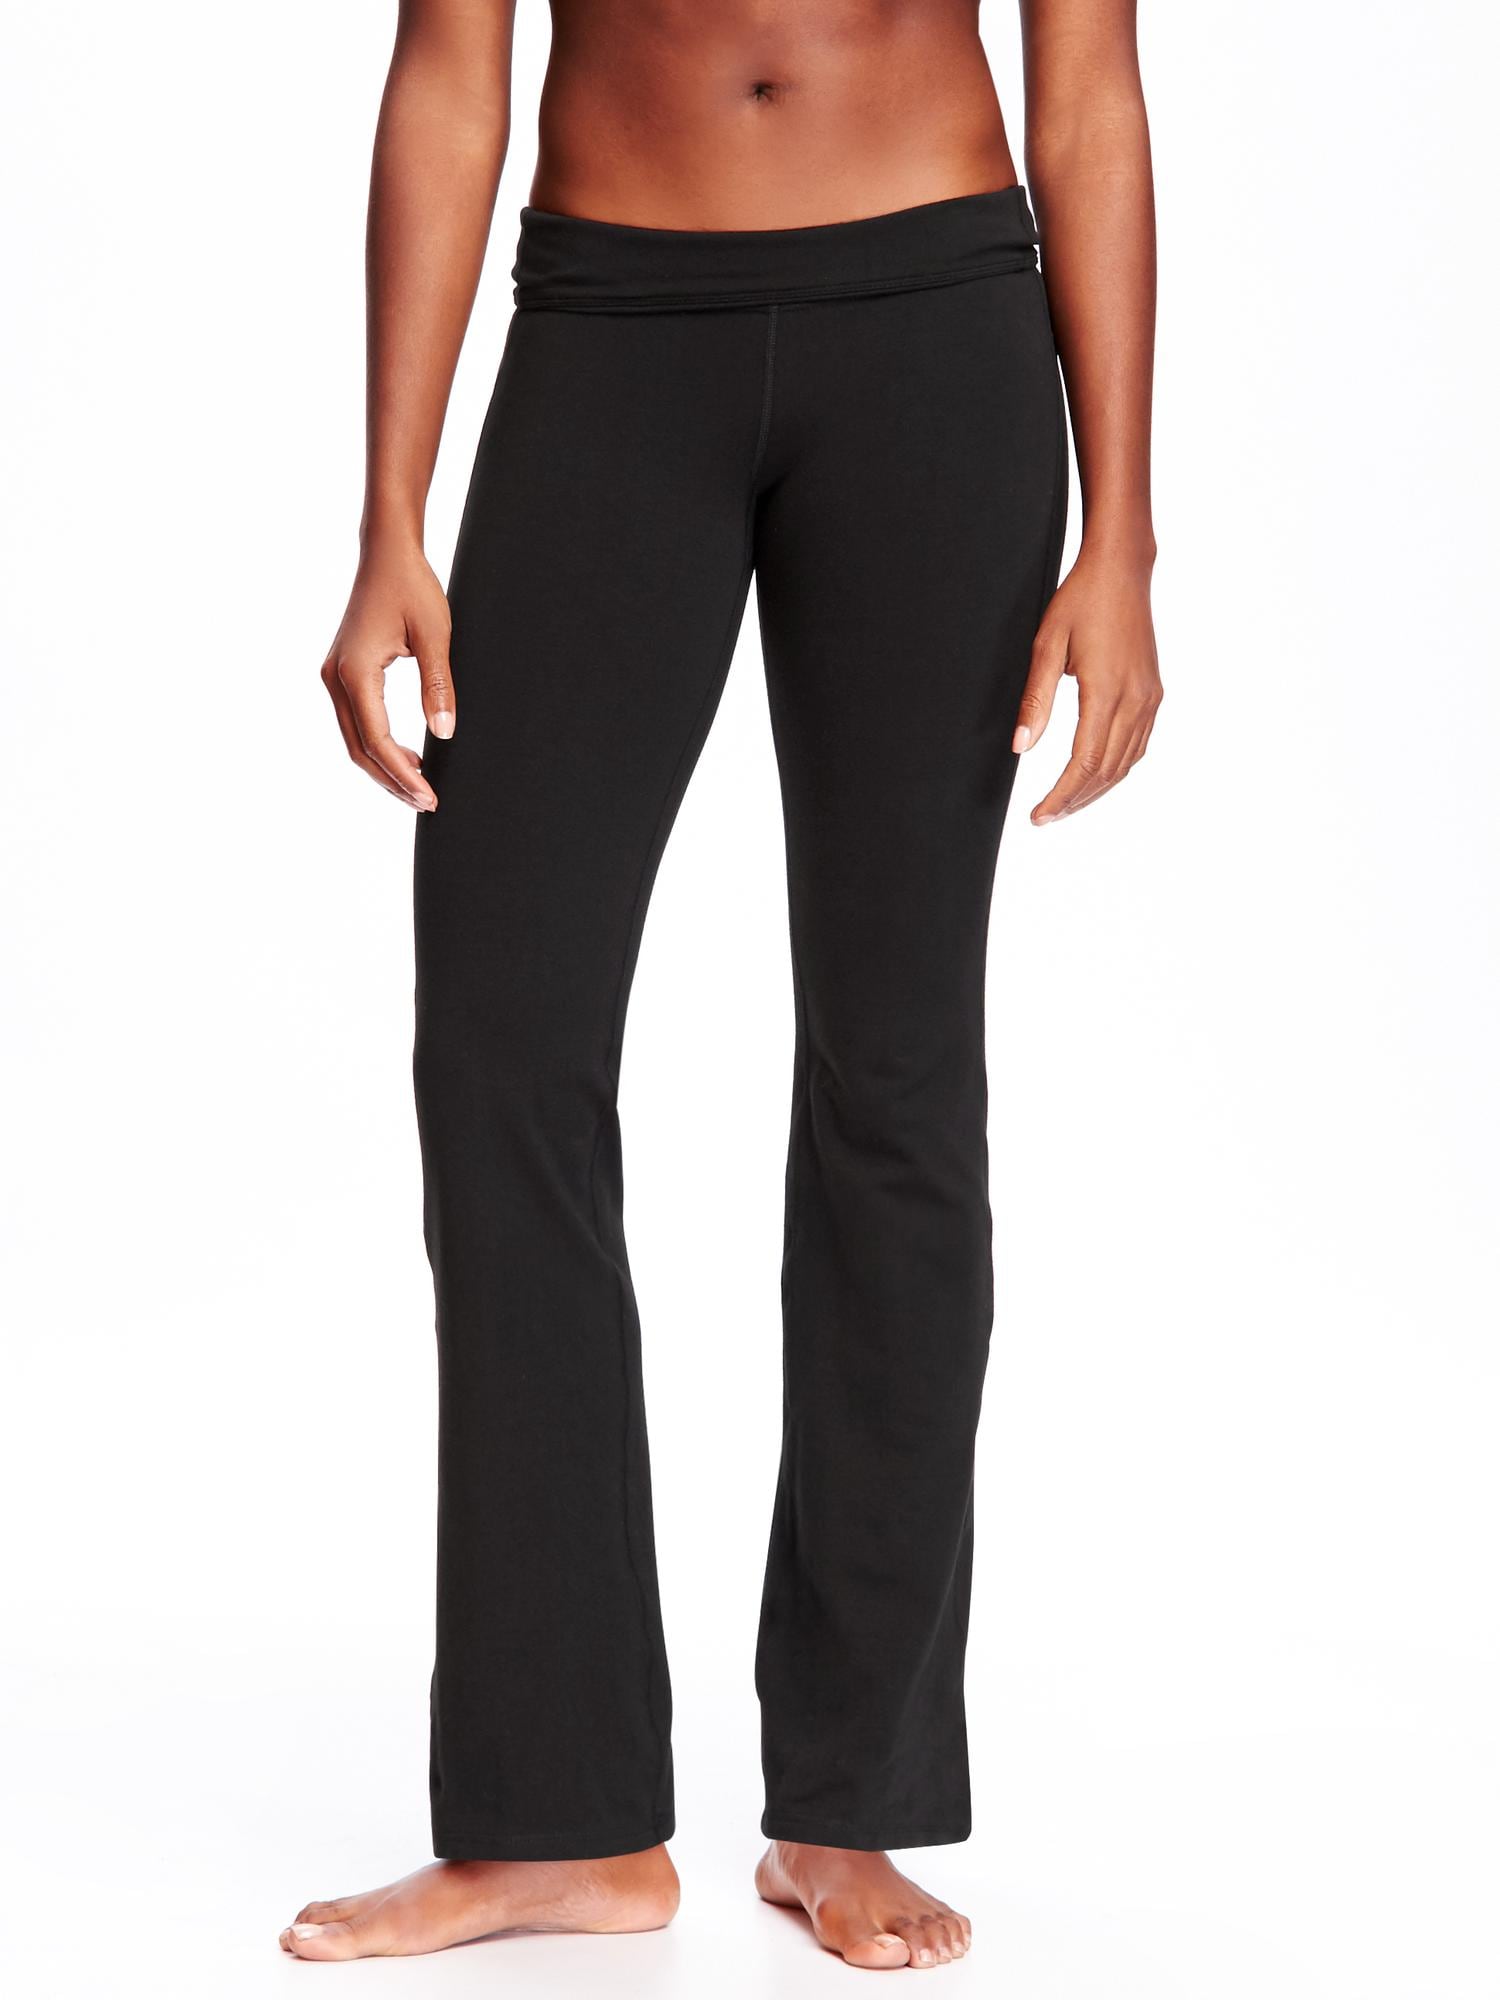 Old Navy, Pants & Jumpsuits, Old Navy High Waisted Black Yoga Pants